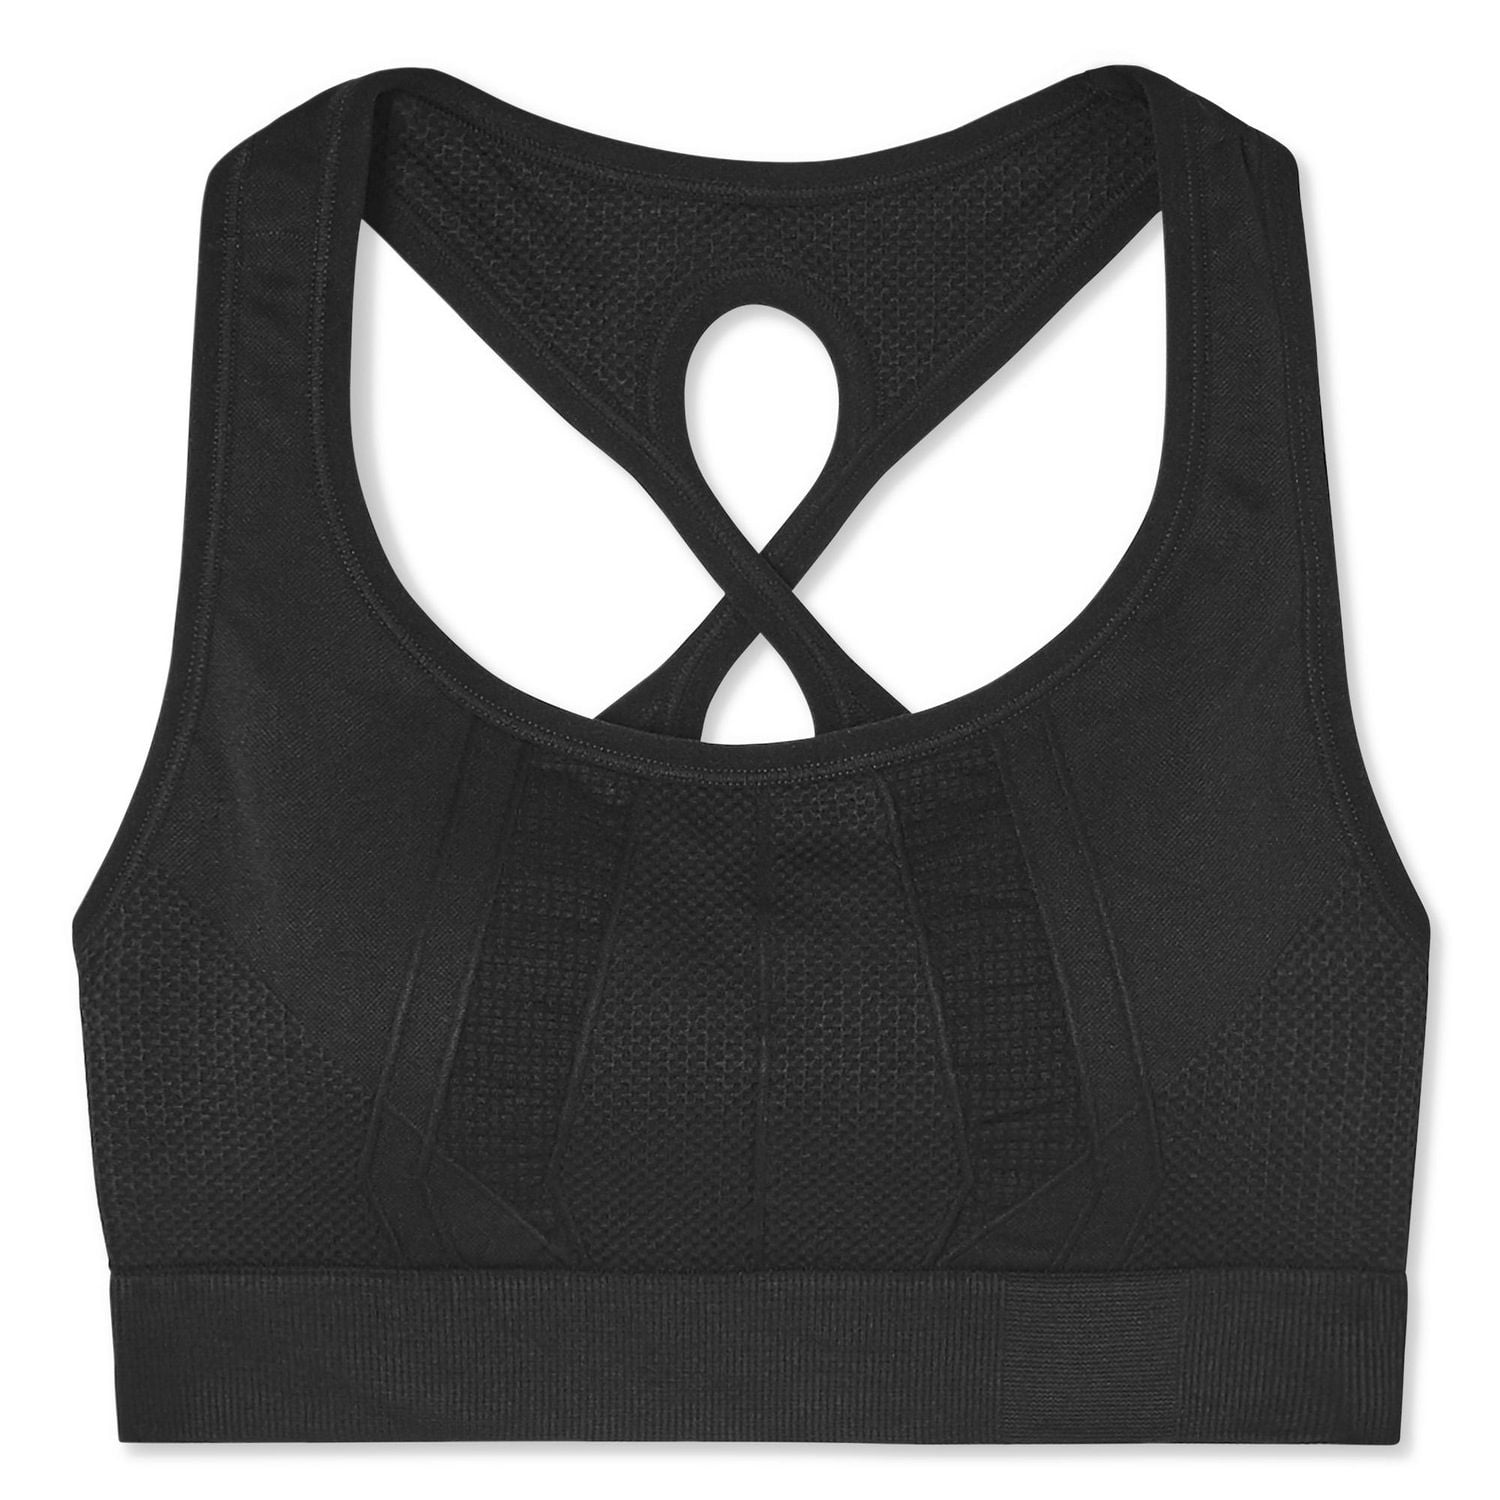 S-XL Fitness Workout Activewear Gym Seamless Cross Back Sports